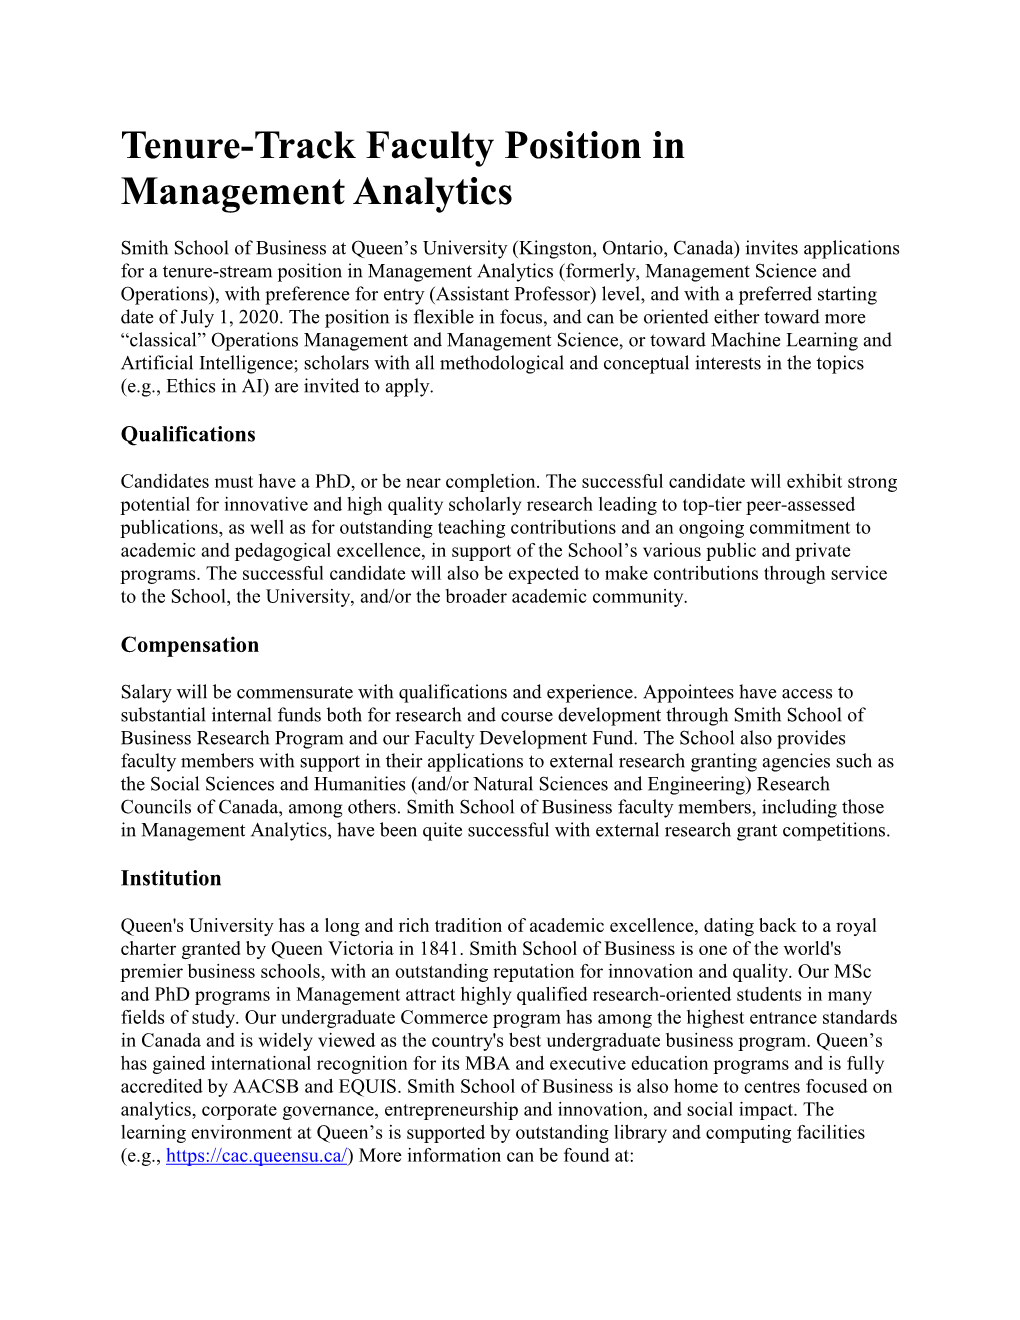 Tenure-Track Faculty Position in Management Analytics